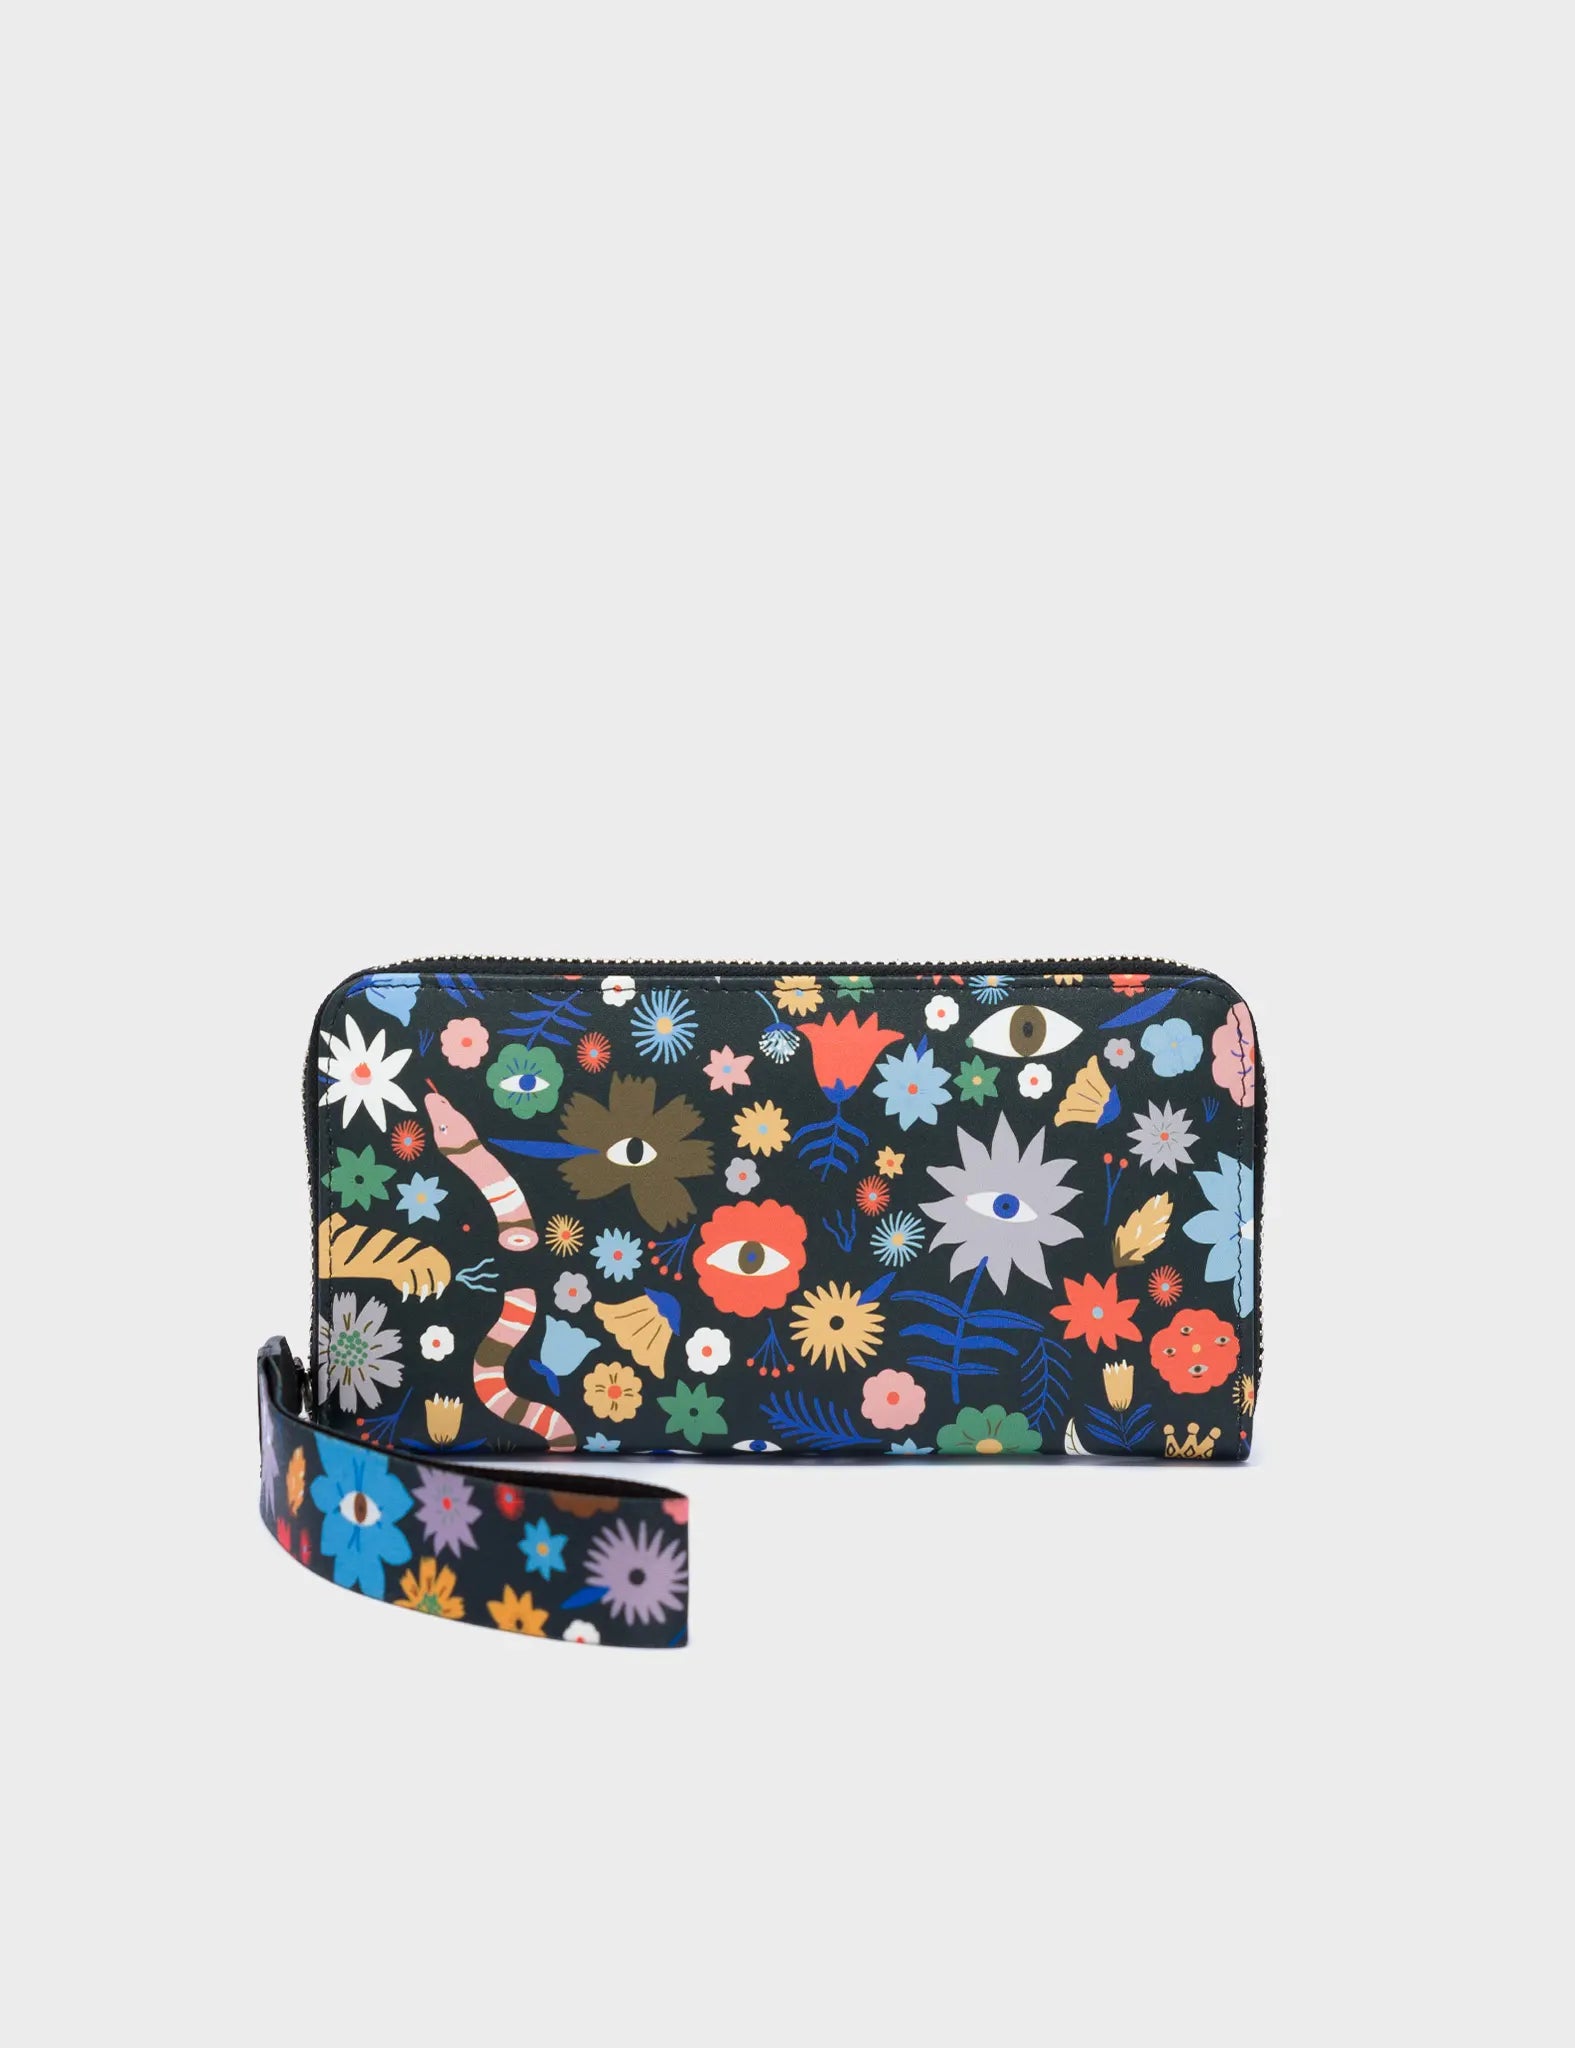 Francis Black Leather Wallet - Flowers